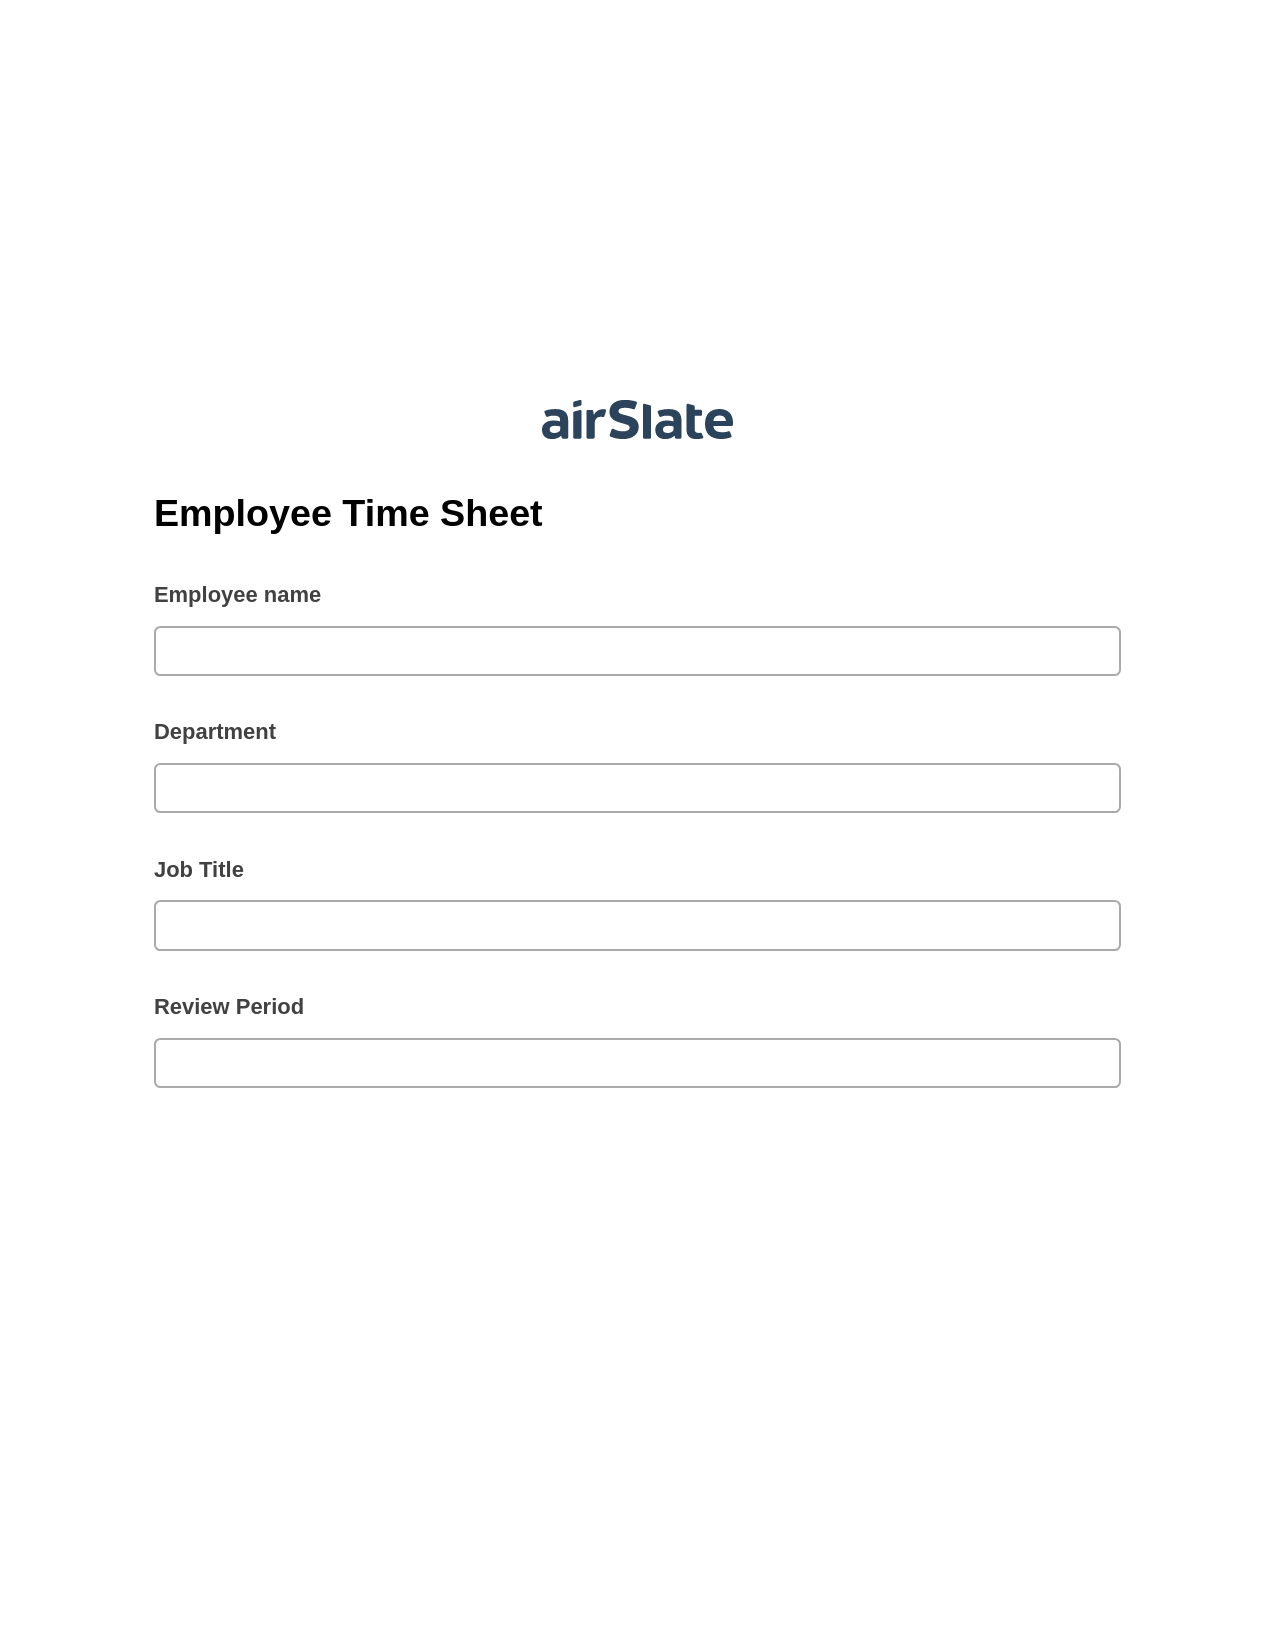 Employee Time Sheet Pre-fill Document Bot, Create Salesforce Records Bot, Archive to OneDrive Bot